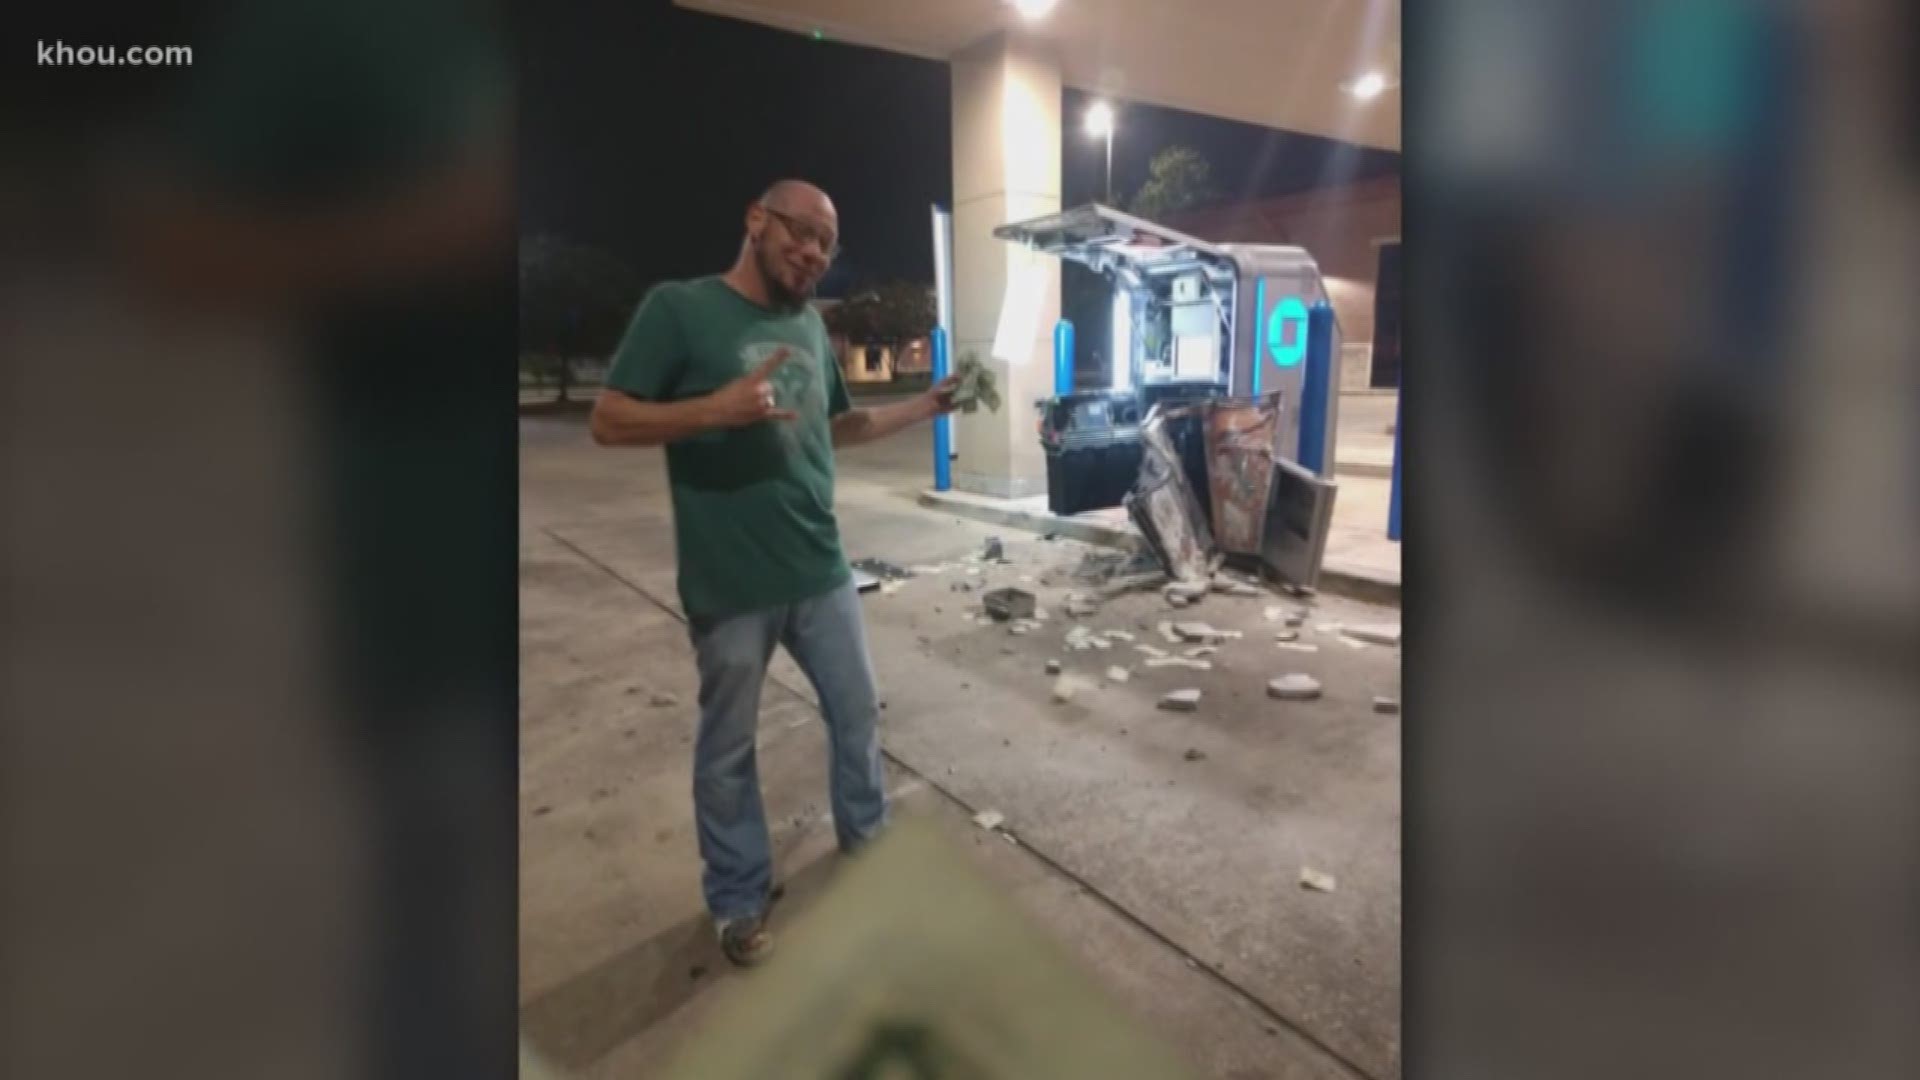 A couple who heard the commotion of a smash-and-grab at a Chase ATM found cash strewn on the ground. Instead of running off with the money before police showed up, they decided to protect it.